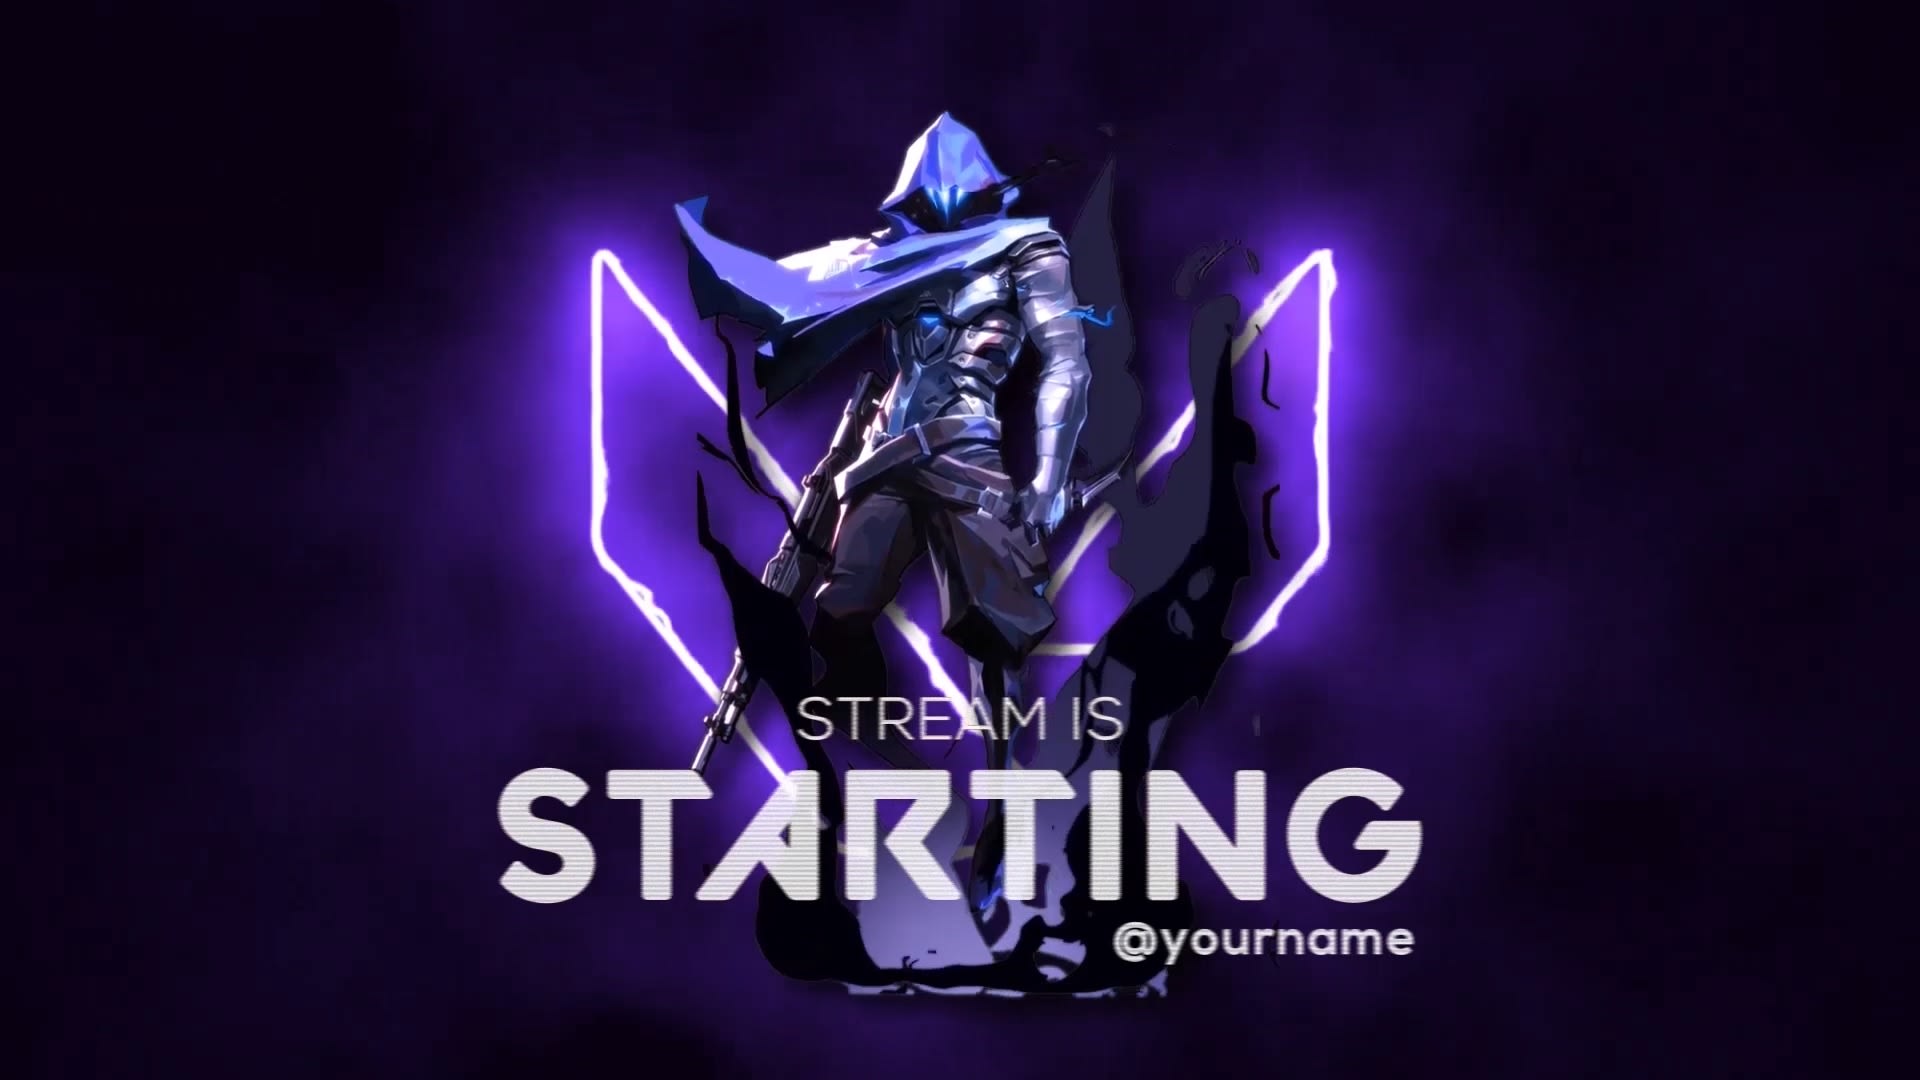 Create an animated stream starting soon screen for streaming